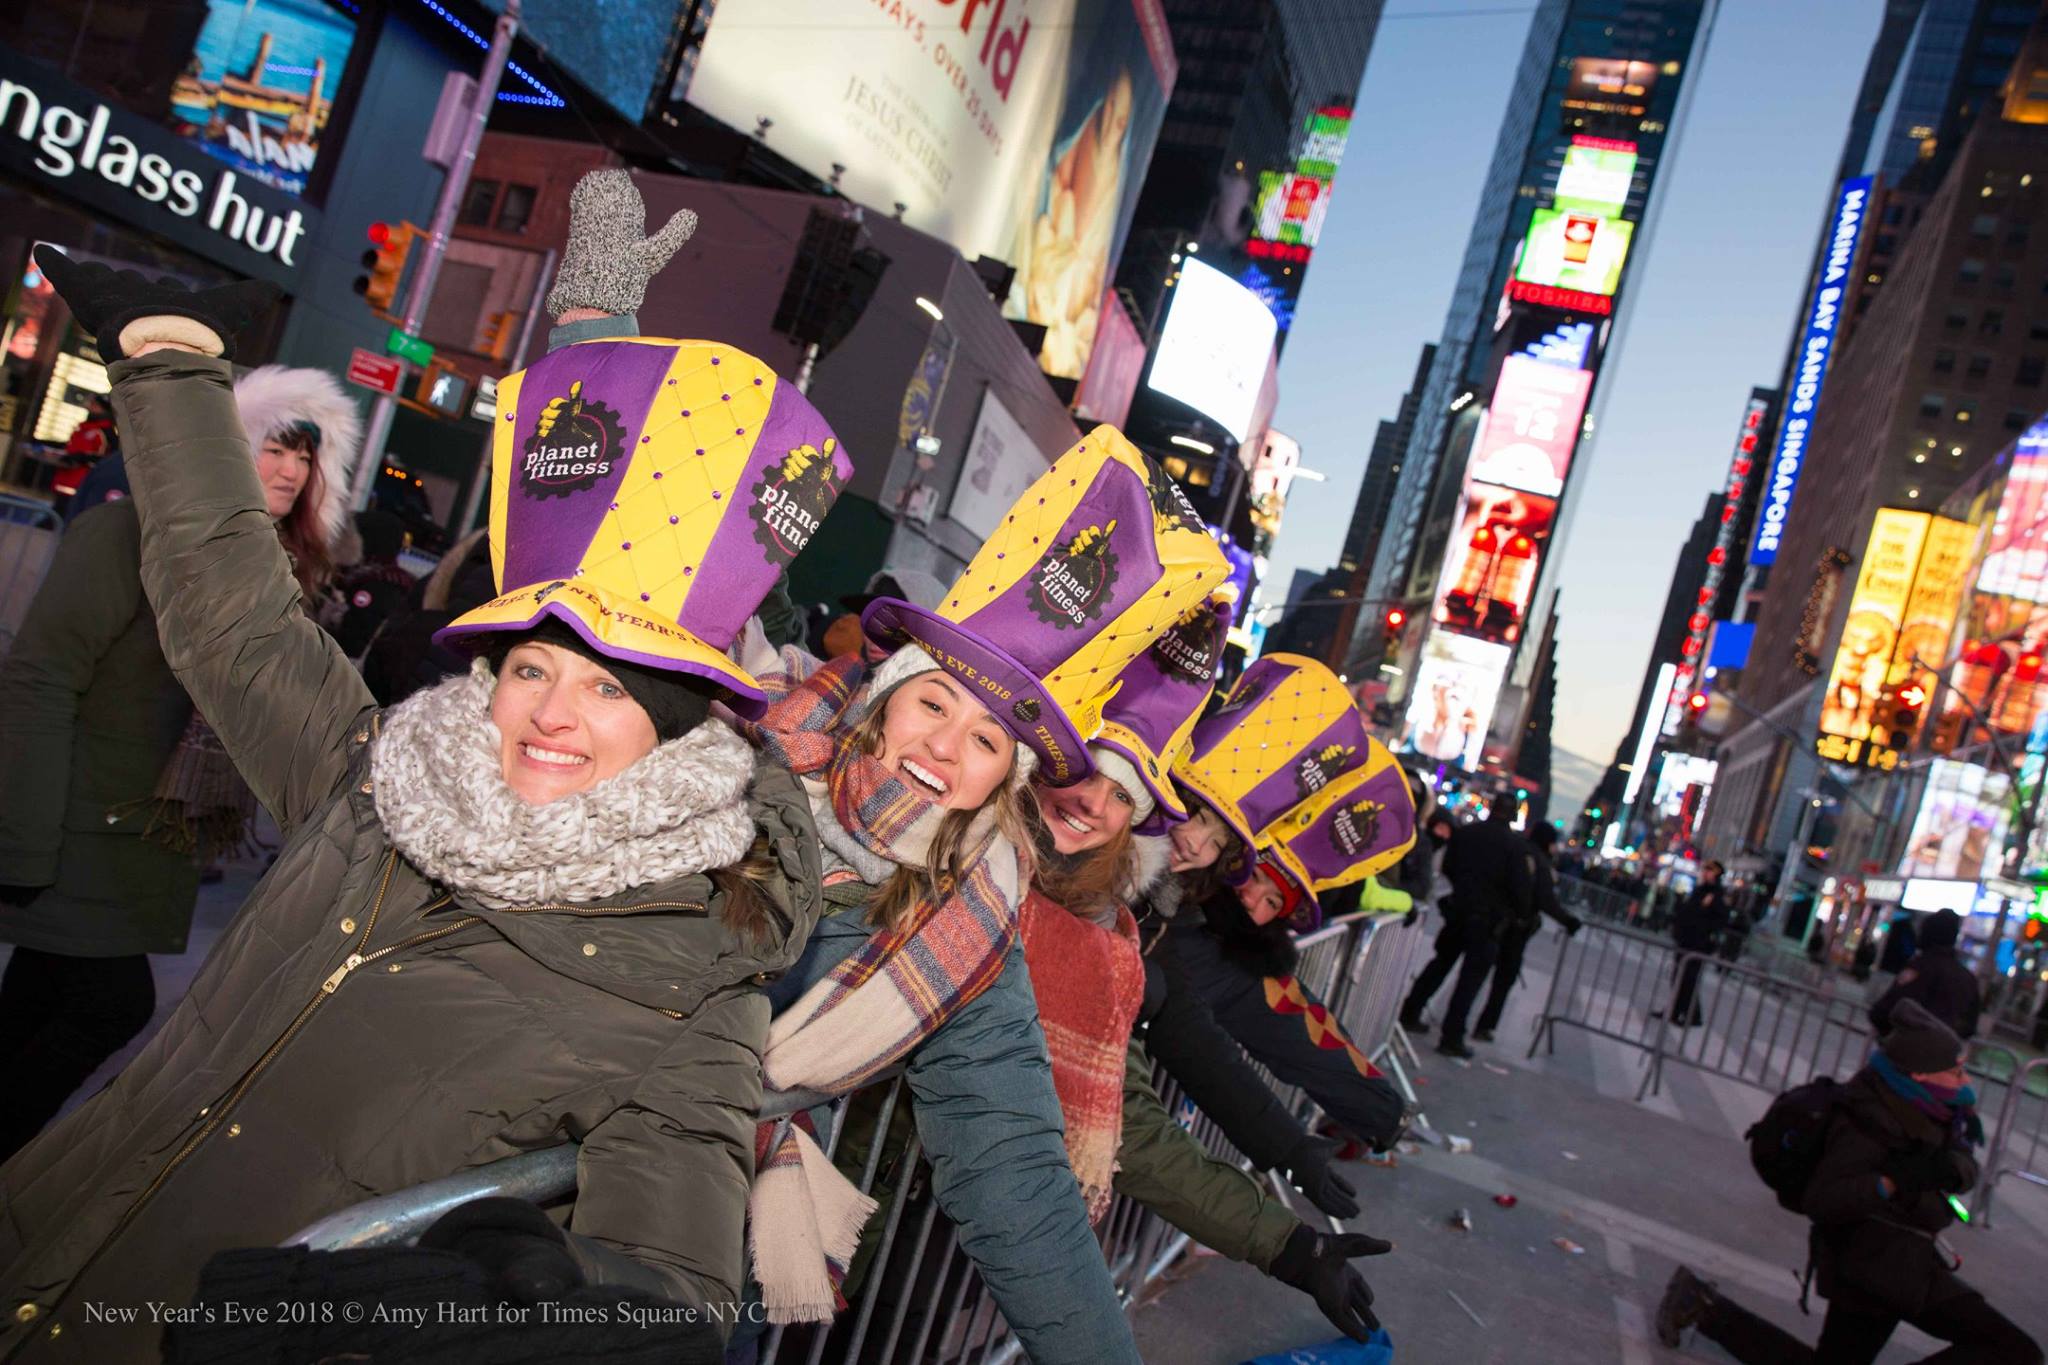 Times Square on X: Revelers are united under one color tonight: @ PlanetFitness purple! We can't wait to see everyone dancing in their Planet  Fitness hats later – this is an official Judgement